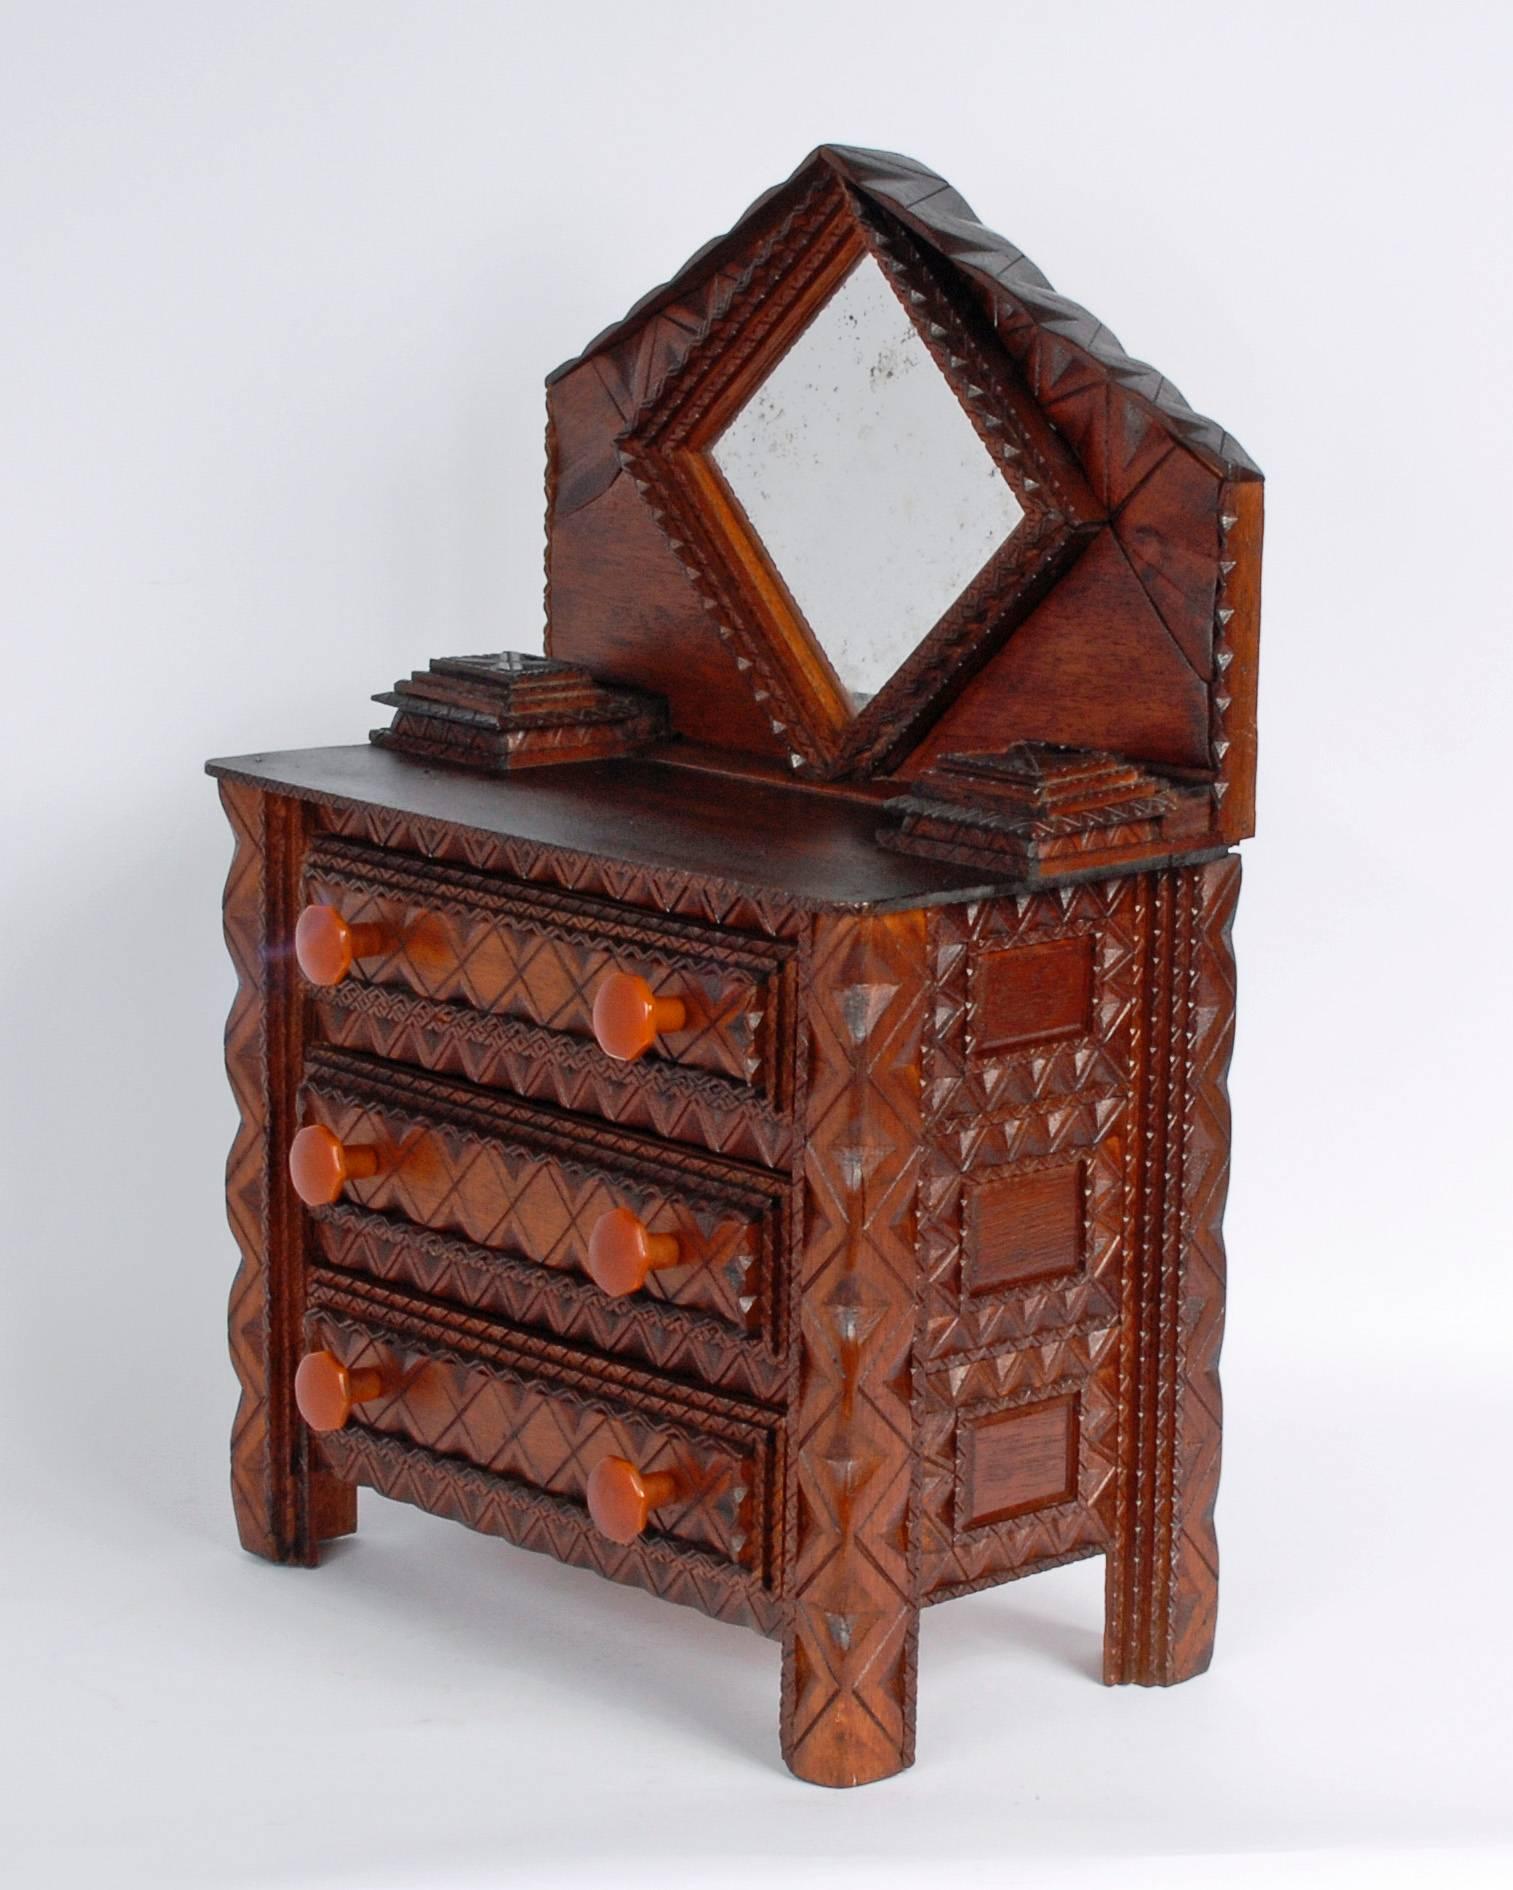 A fine Tramp Art miniature dresser with a peaked top, three large drawers with Bakelite knobs, two lift-top compartments and a diamond shaped mirror. The dresser exhibits finely carved details and the original Bakelite knobs are a nice